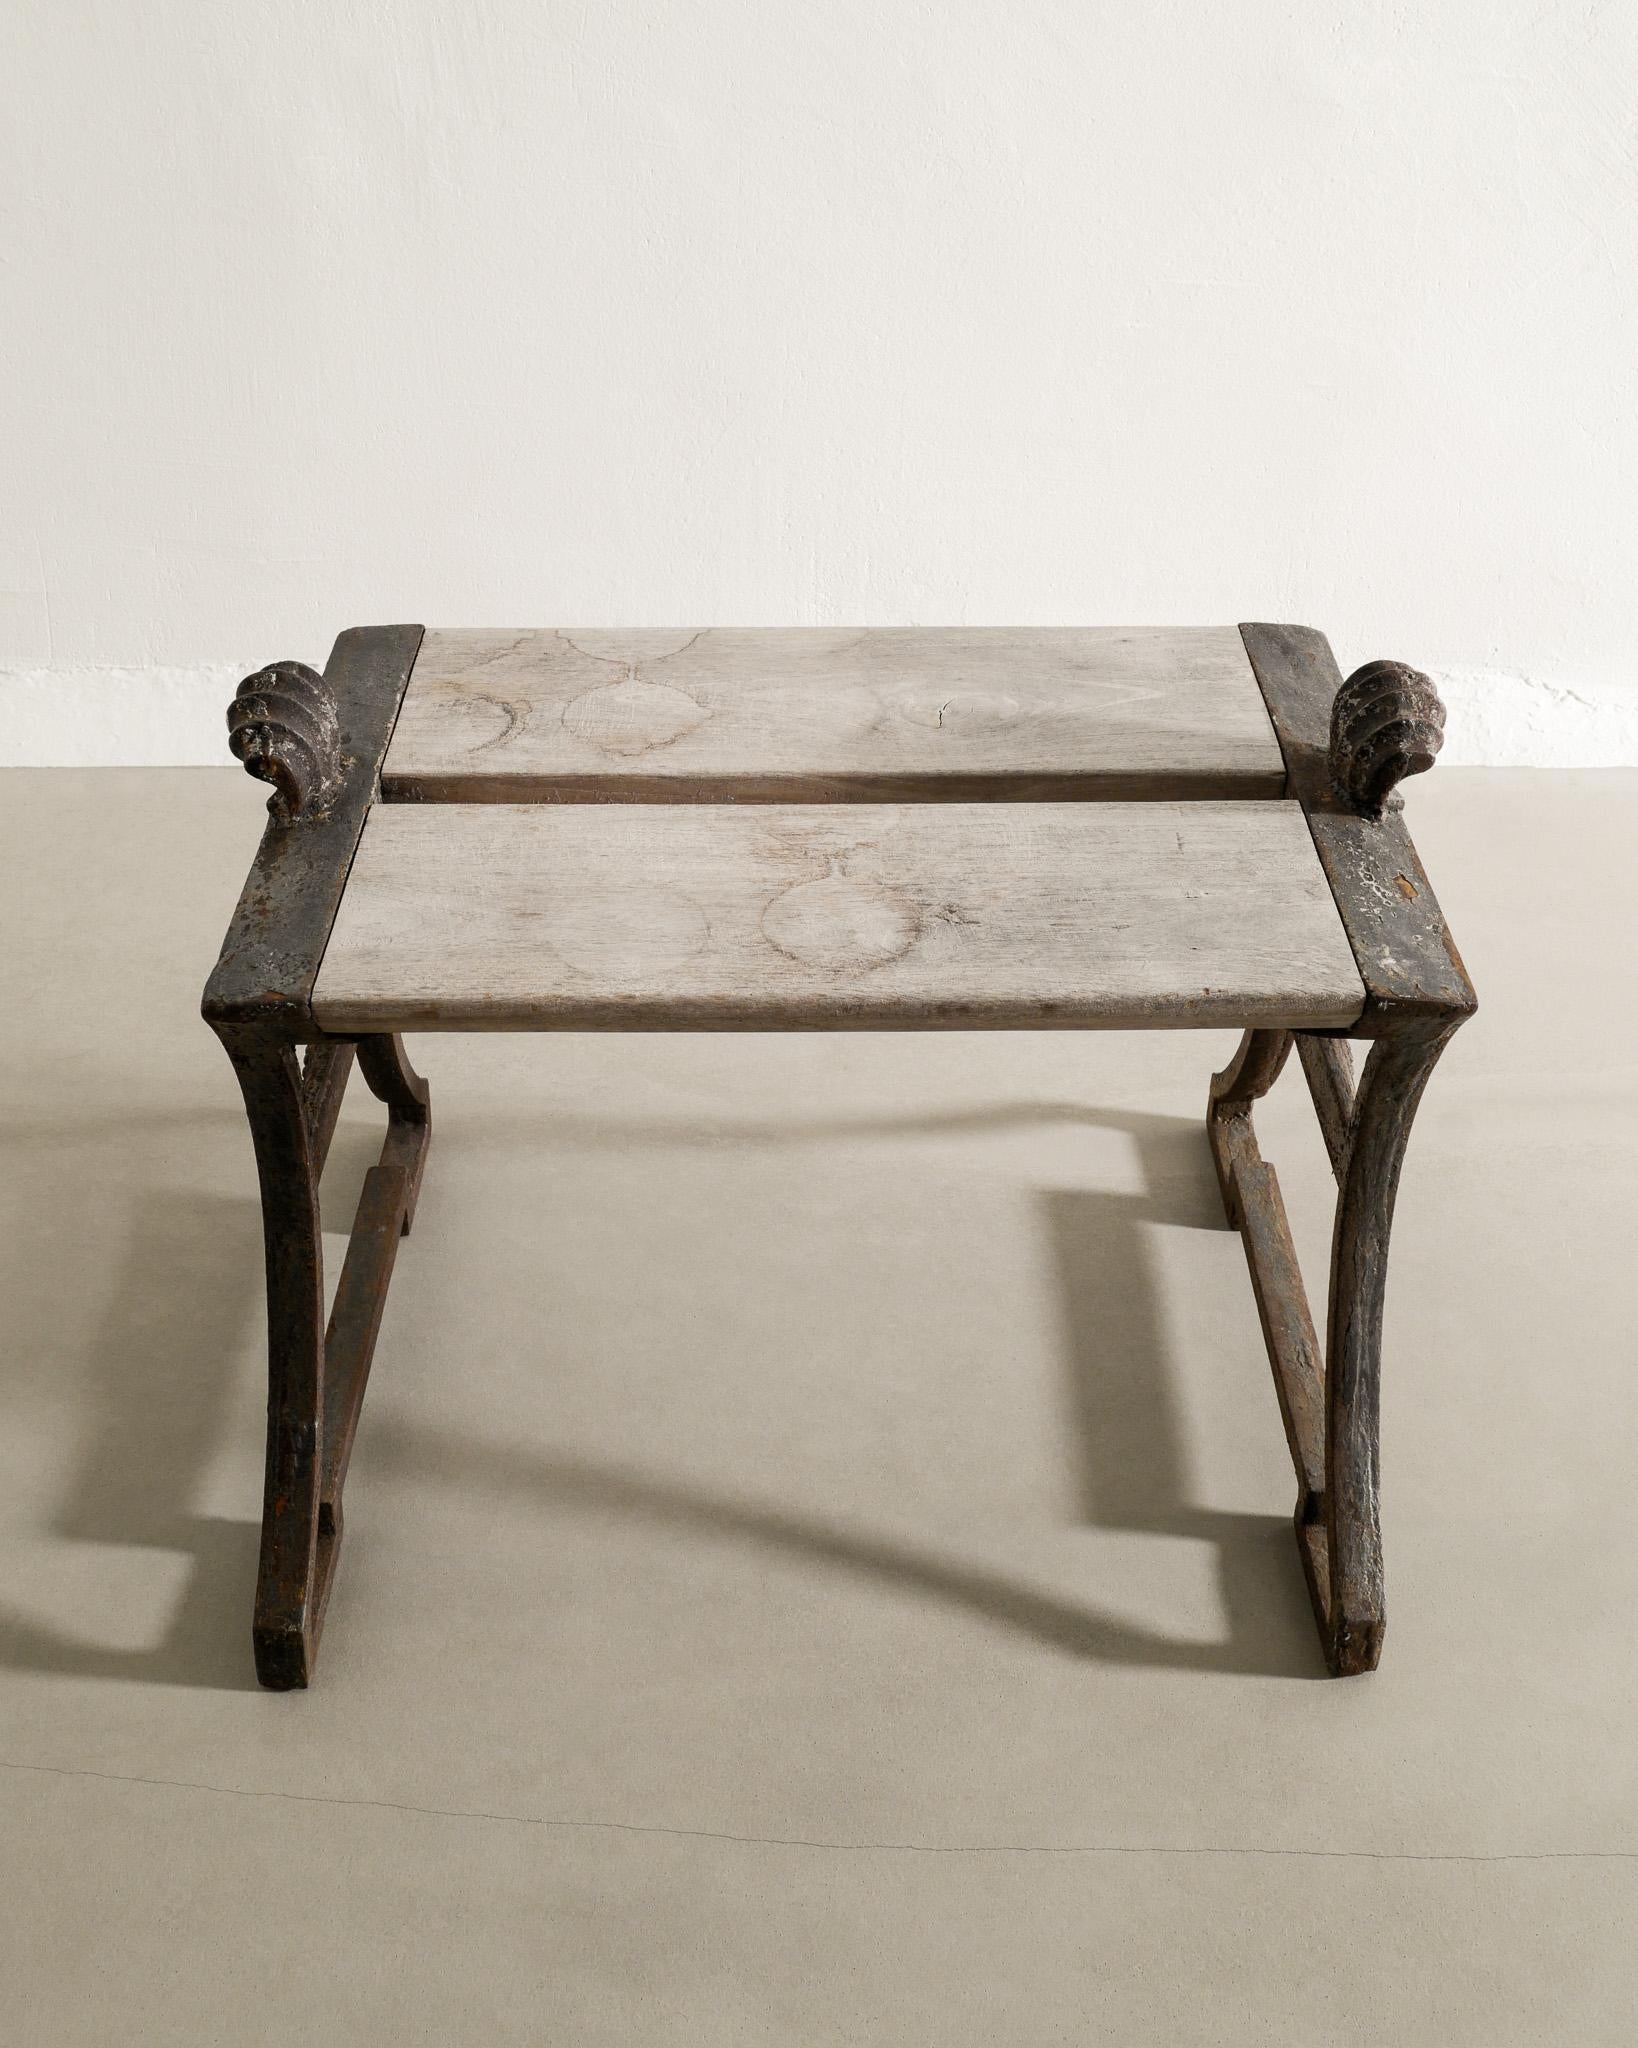 Early 20th Century Swedish Bench by Folke Bensow in Cast Iron & Pine for Näfveqvarns Bruk, 1920s